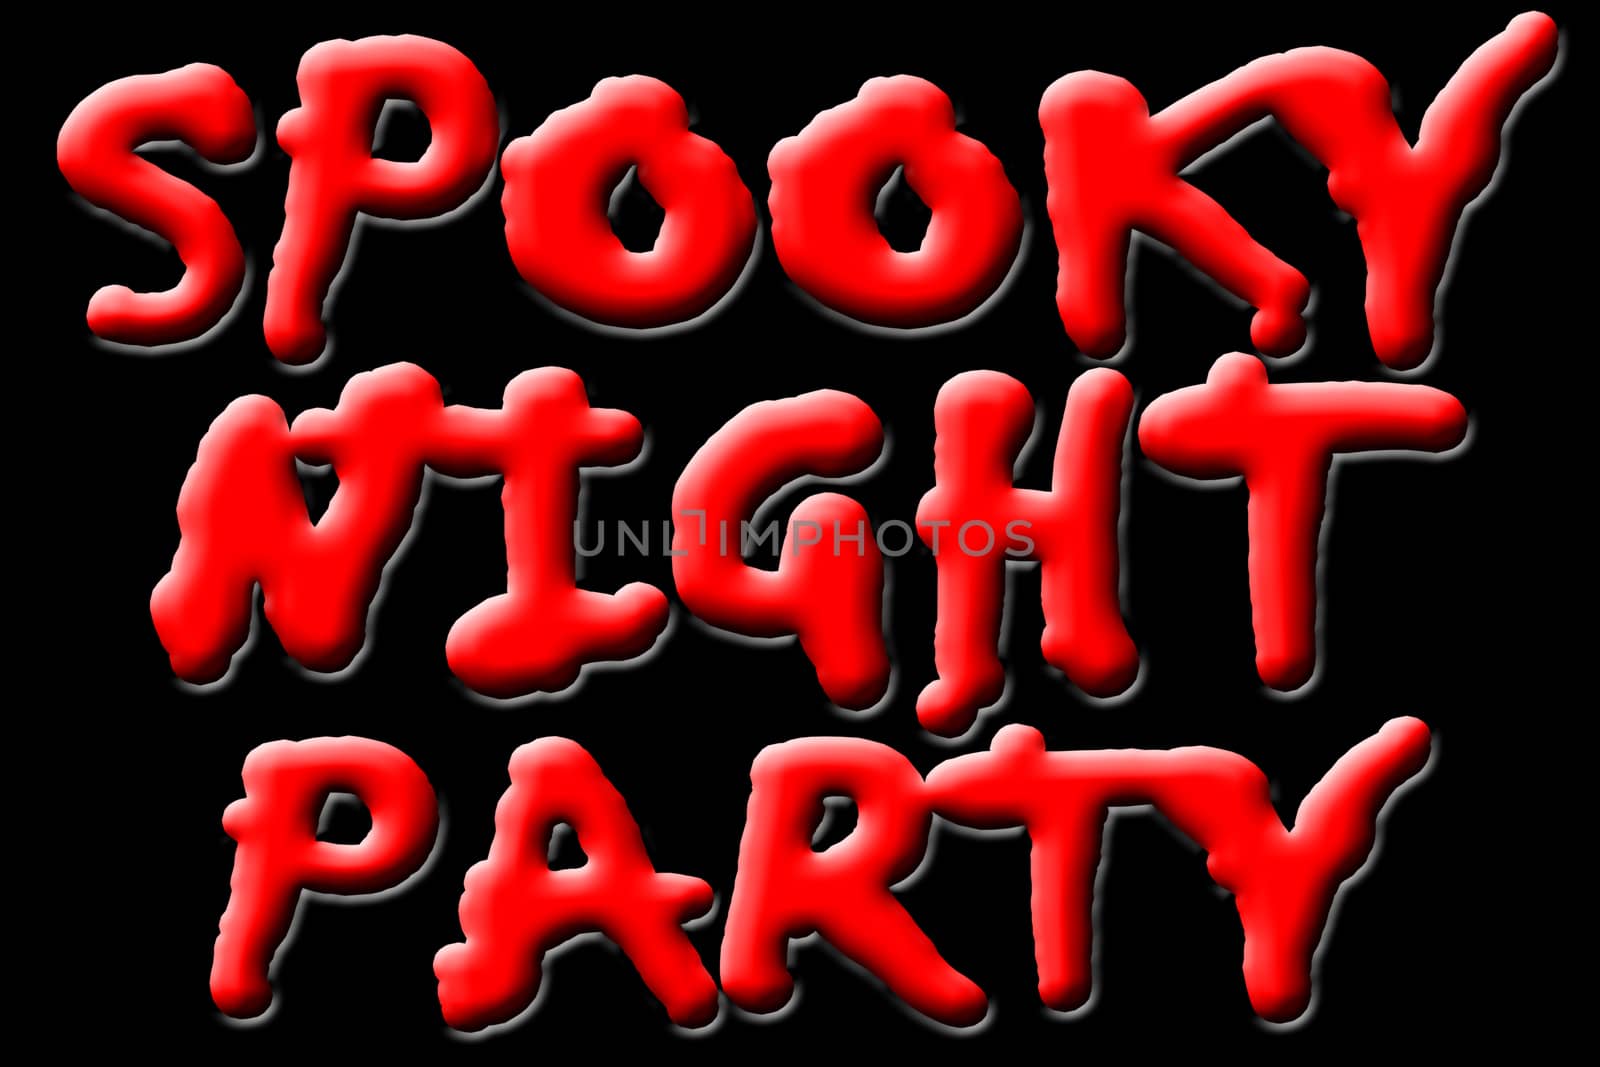 Spooky Night Party halloween theme by Nonneljohn